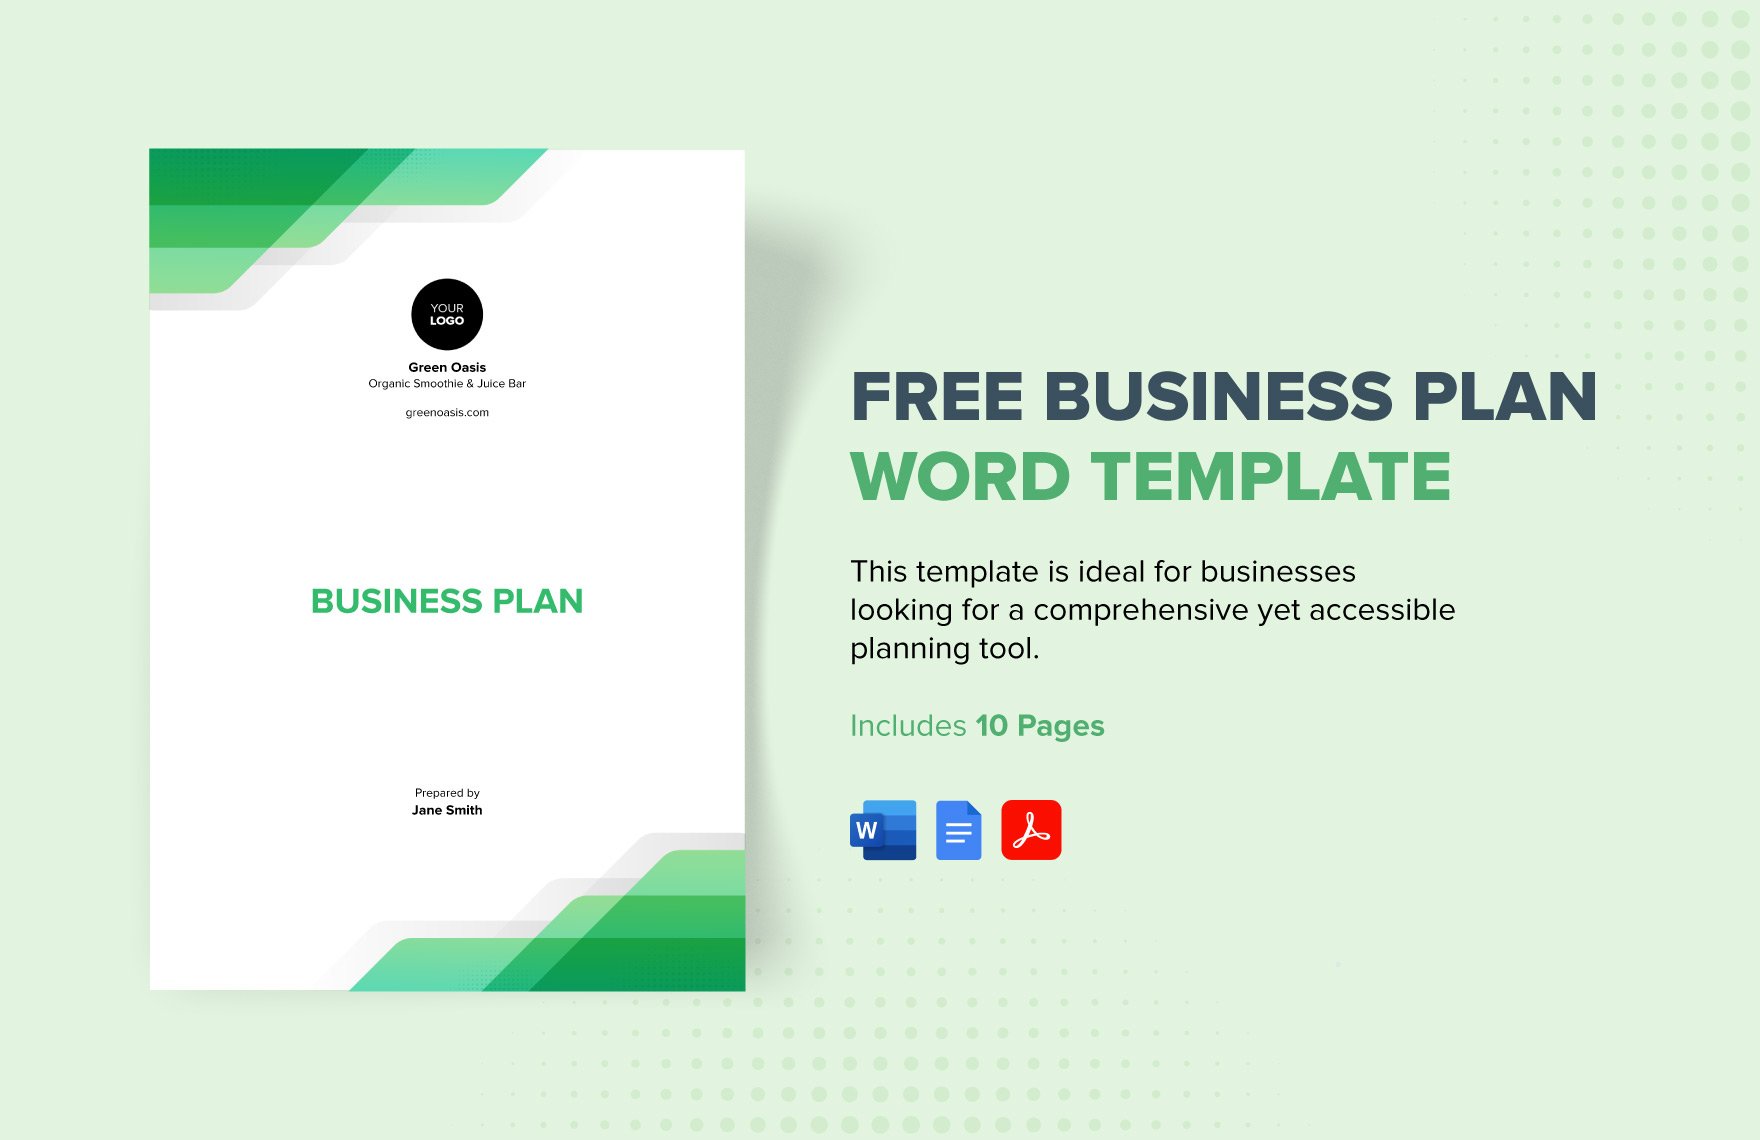 Free Business Plan Word Template in Word, Google Docs, PDF